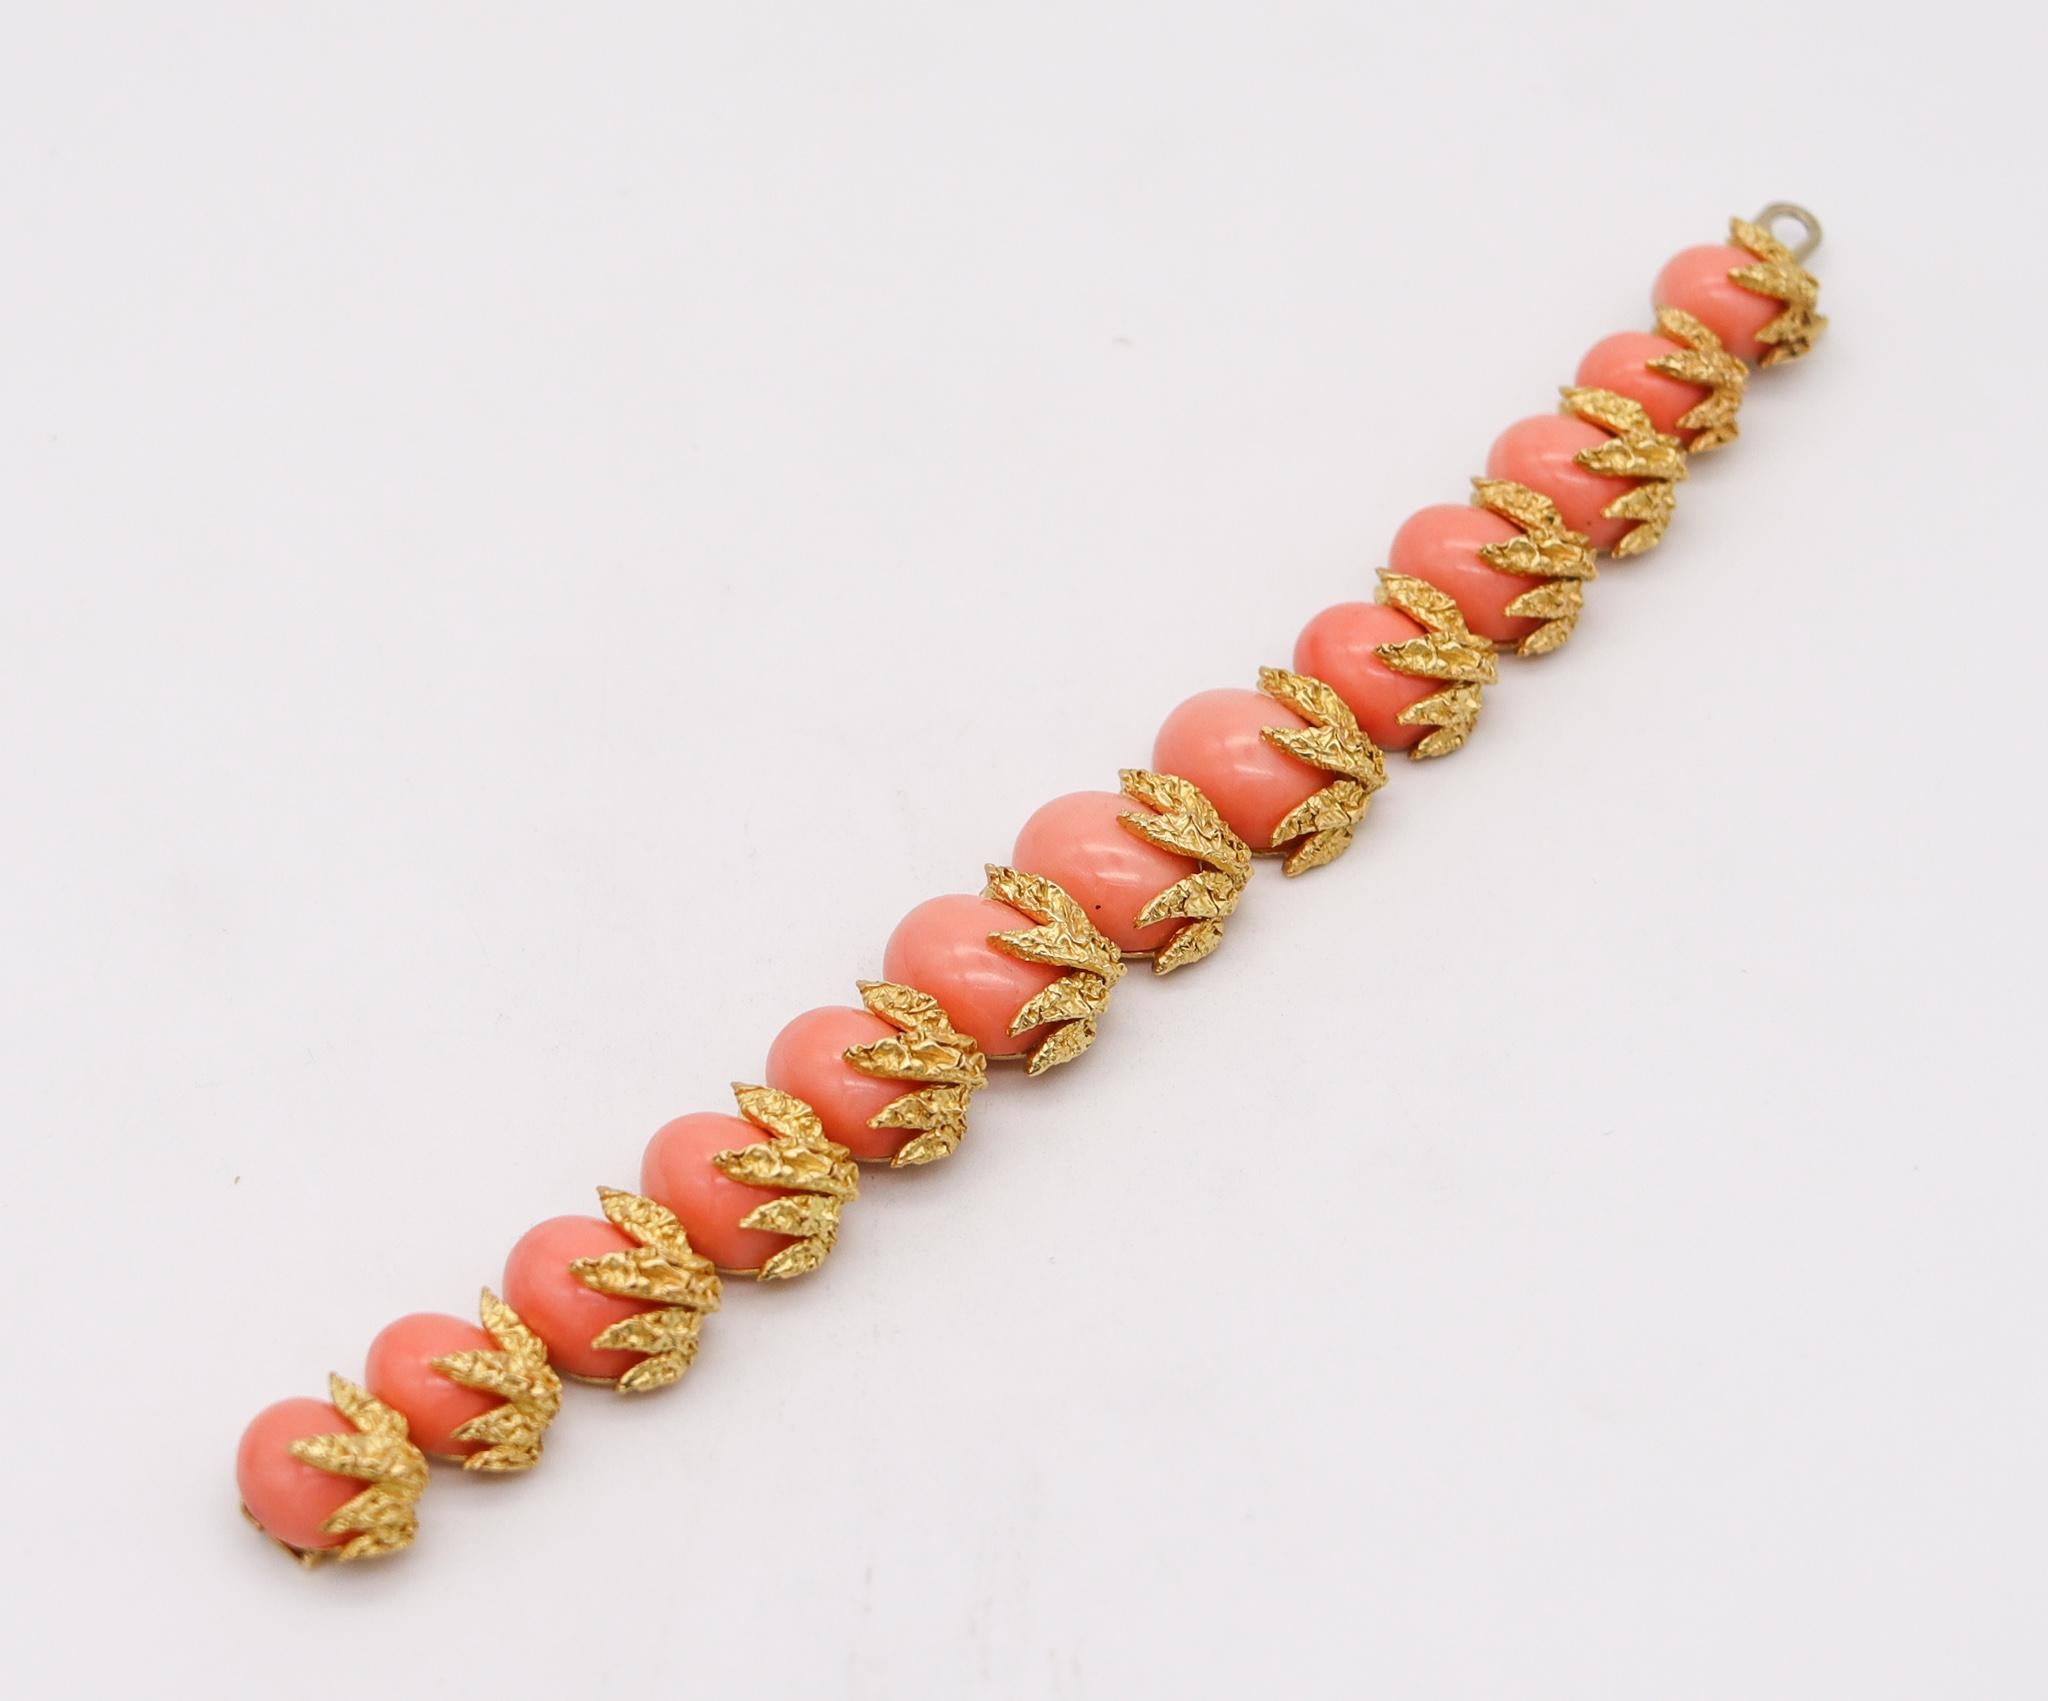 Modernist Fred of Paris 1970 Bracelet in Textured 18kt Yellow Gold with Graduated Corals